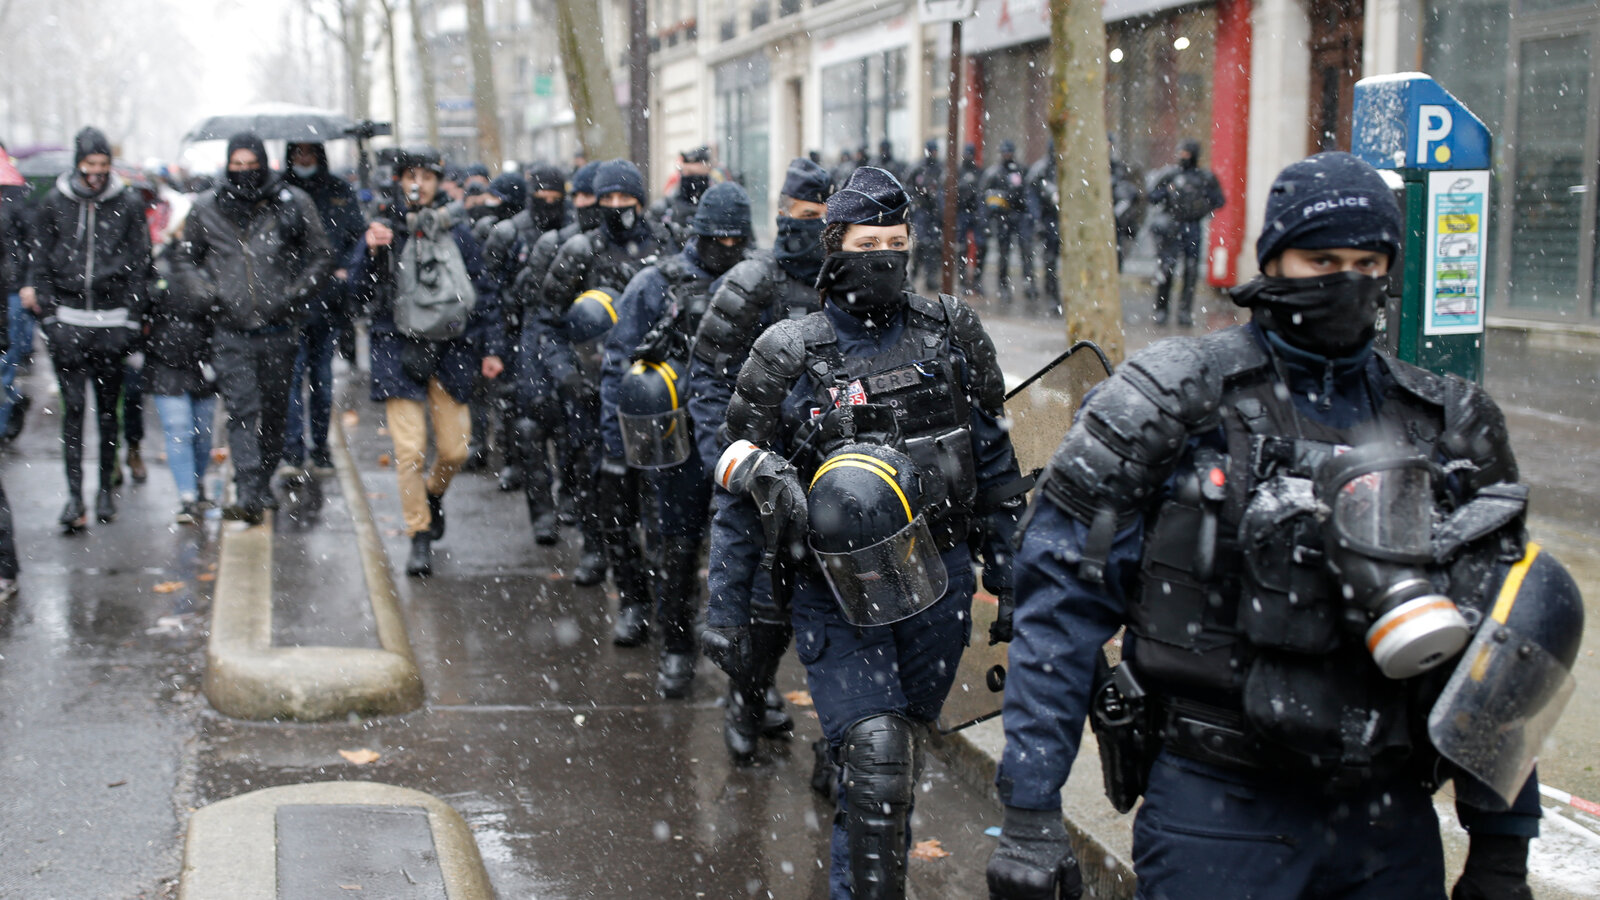 Counter terrorism in France  - Paris attacks and terror trial